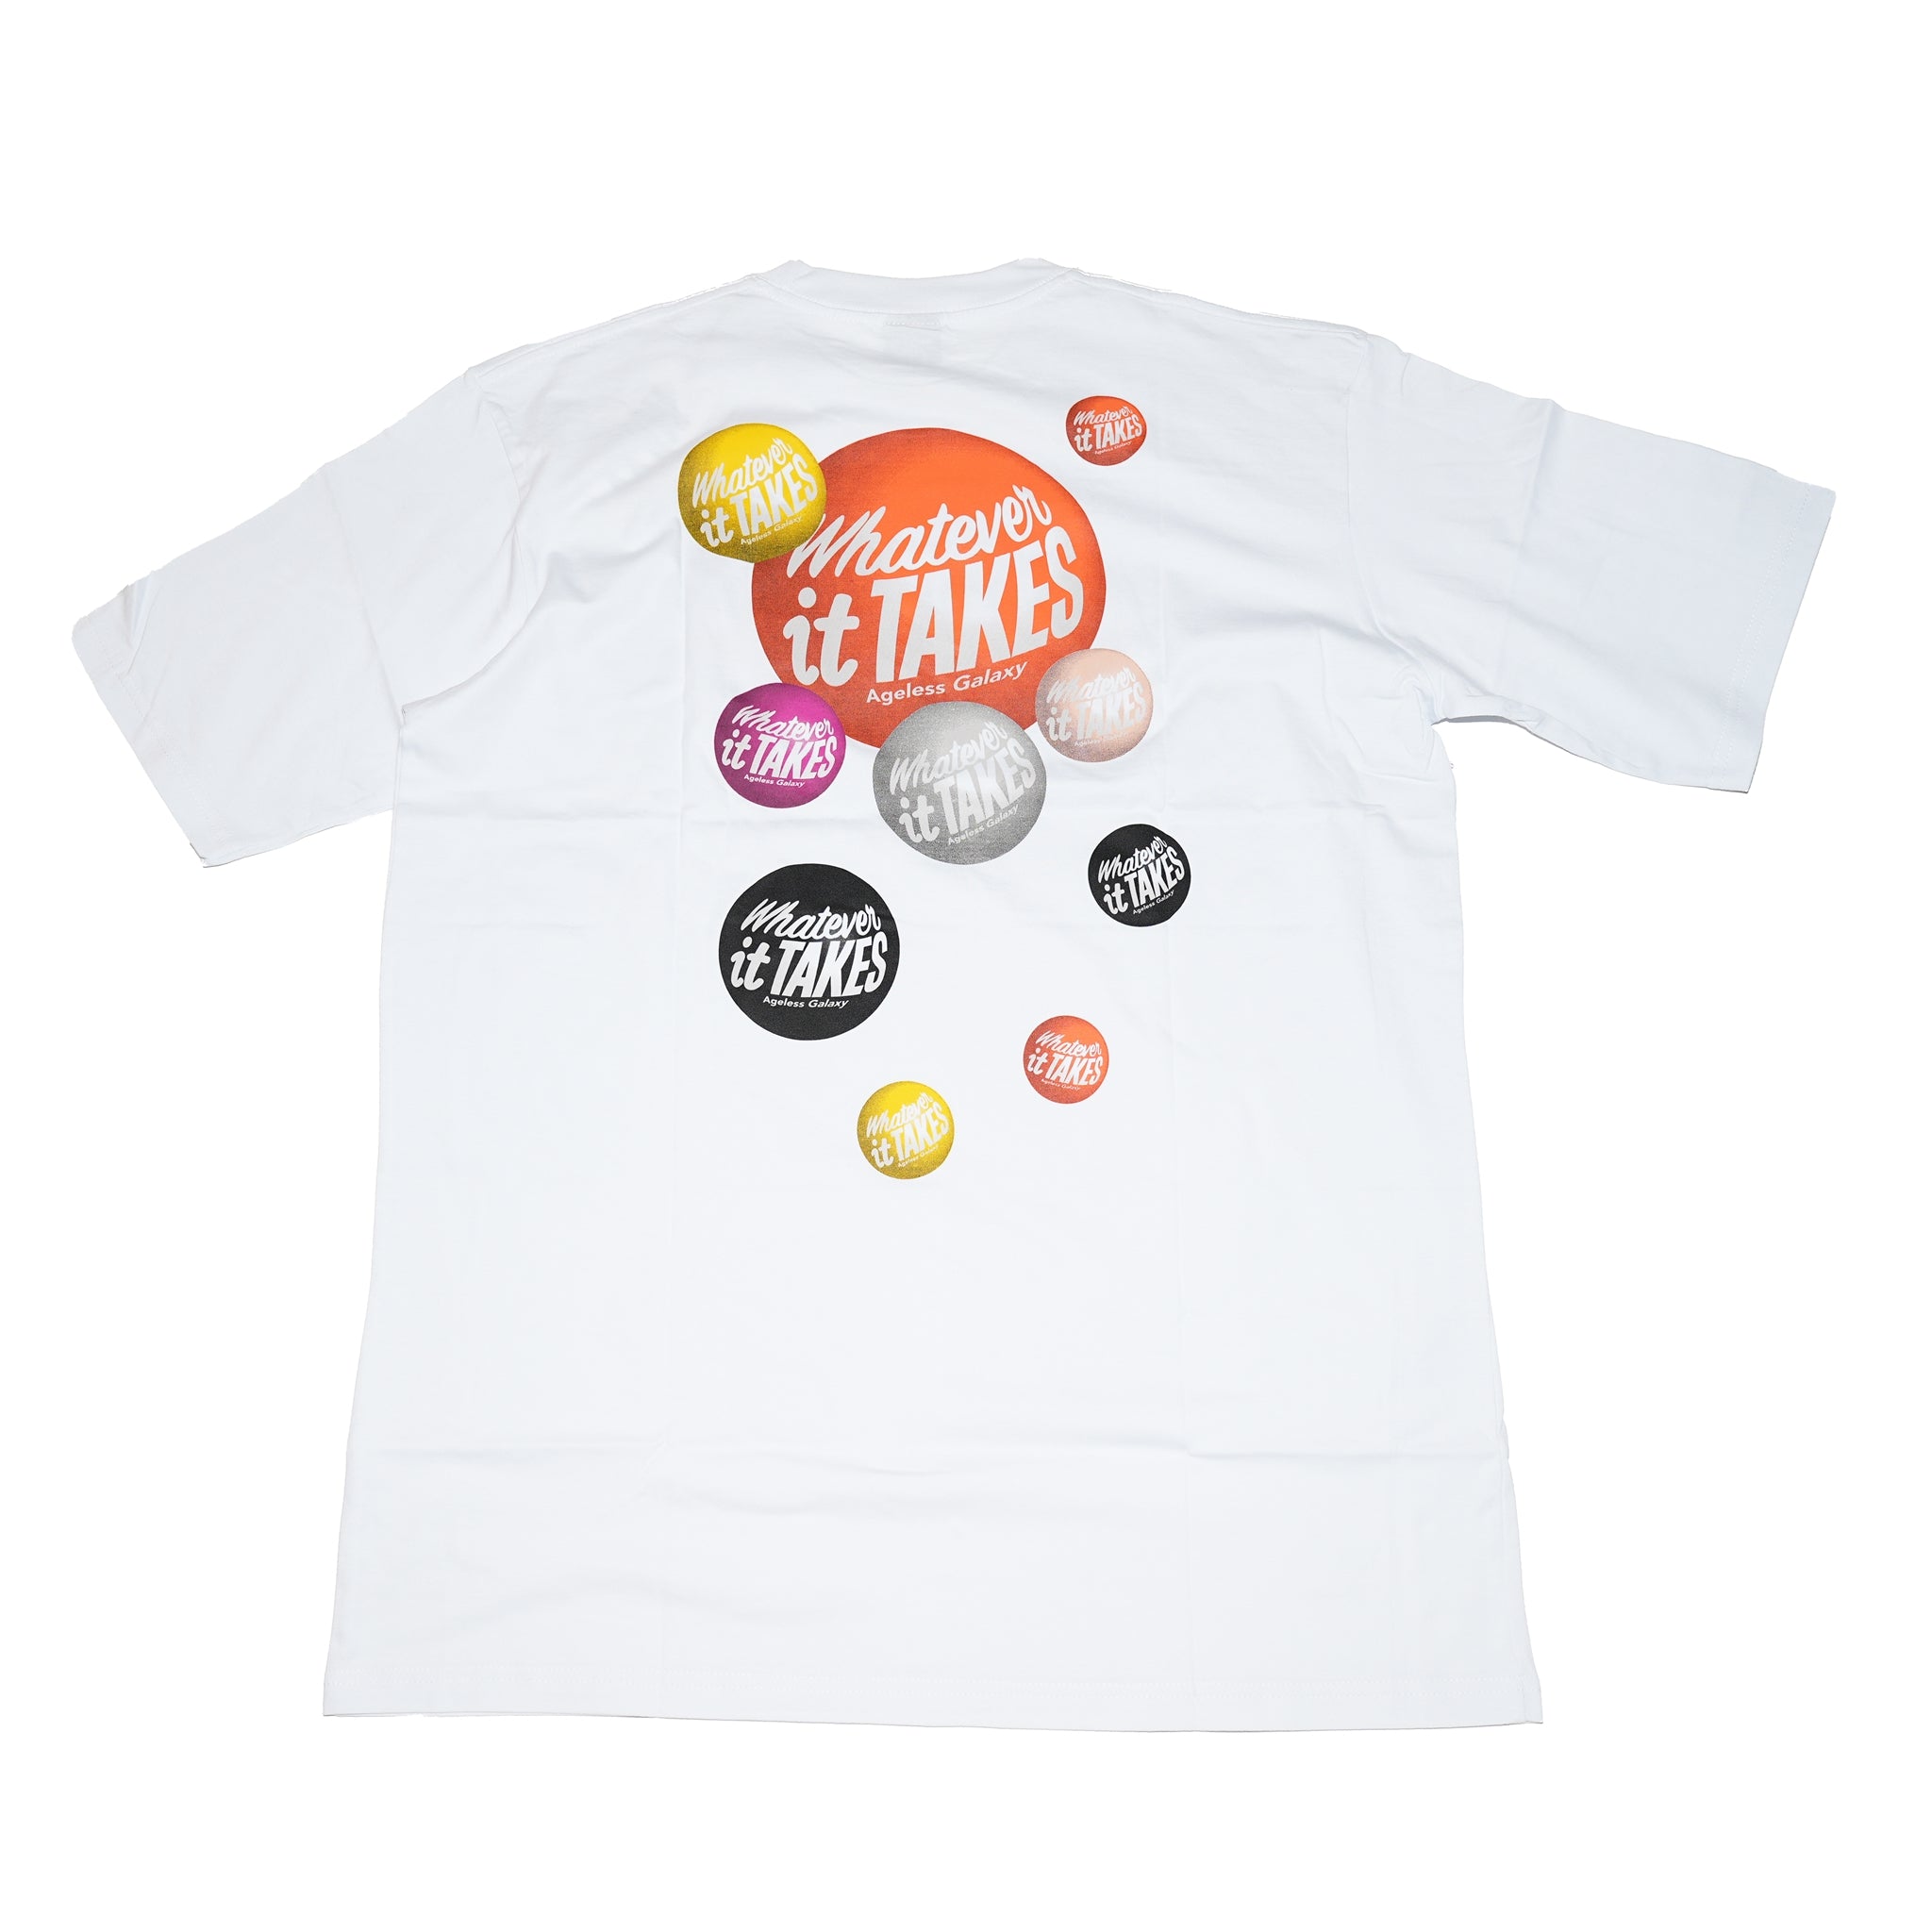 No:TSAG140 | Name:Whatever it Takes 015 S/S TEE | Color:White【AGELESS GALAXY_エイジレスギャラクシー】【ネコポス選択可能】